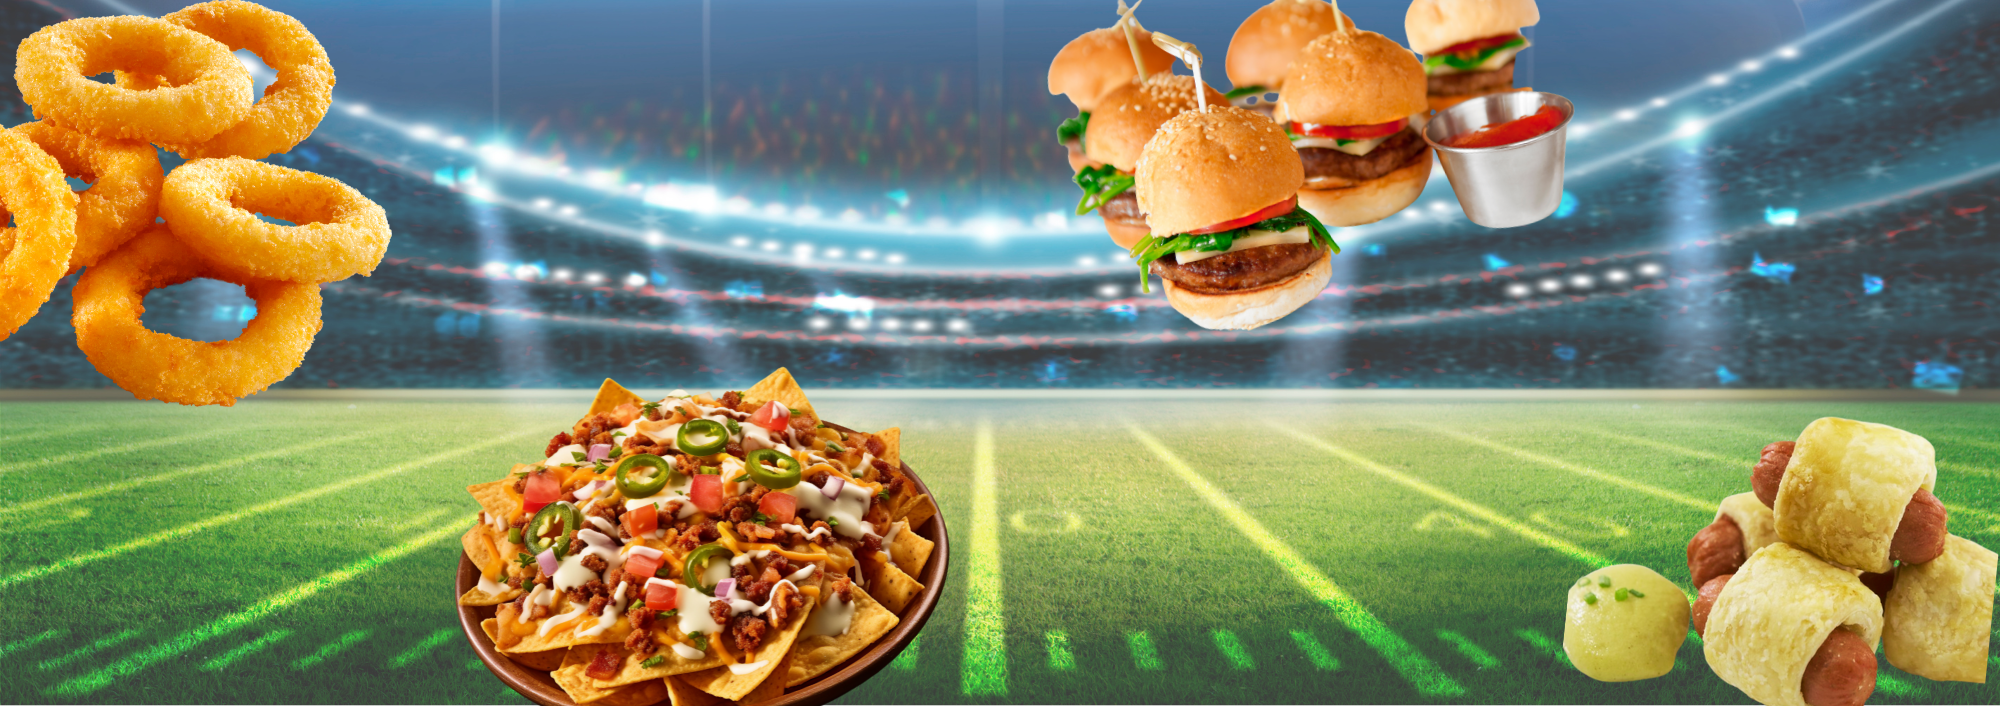 Game Day Grub: Ingredients for the Big Game and Beyond